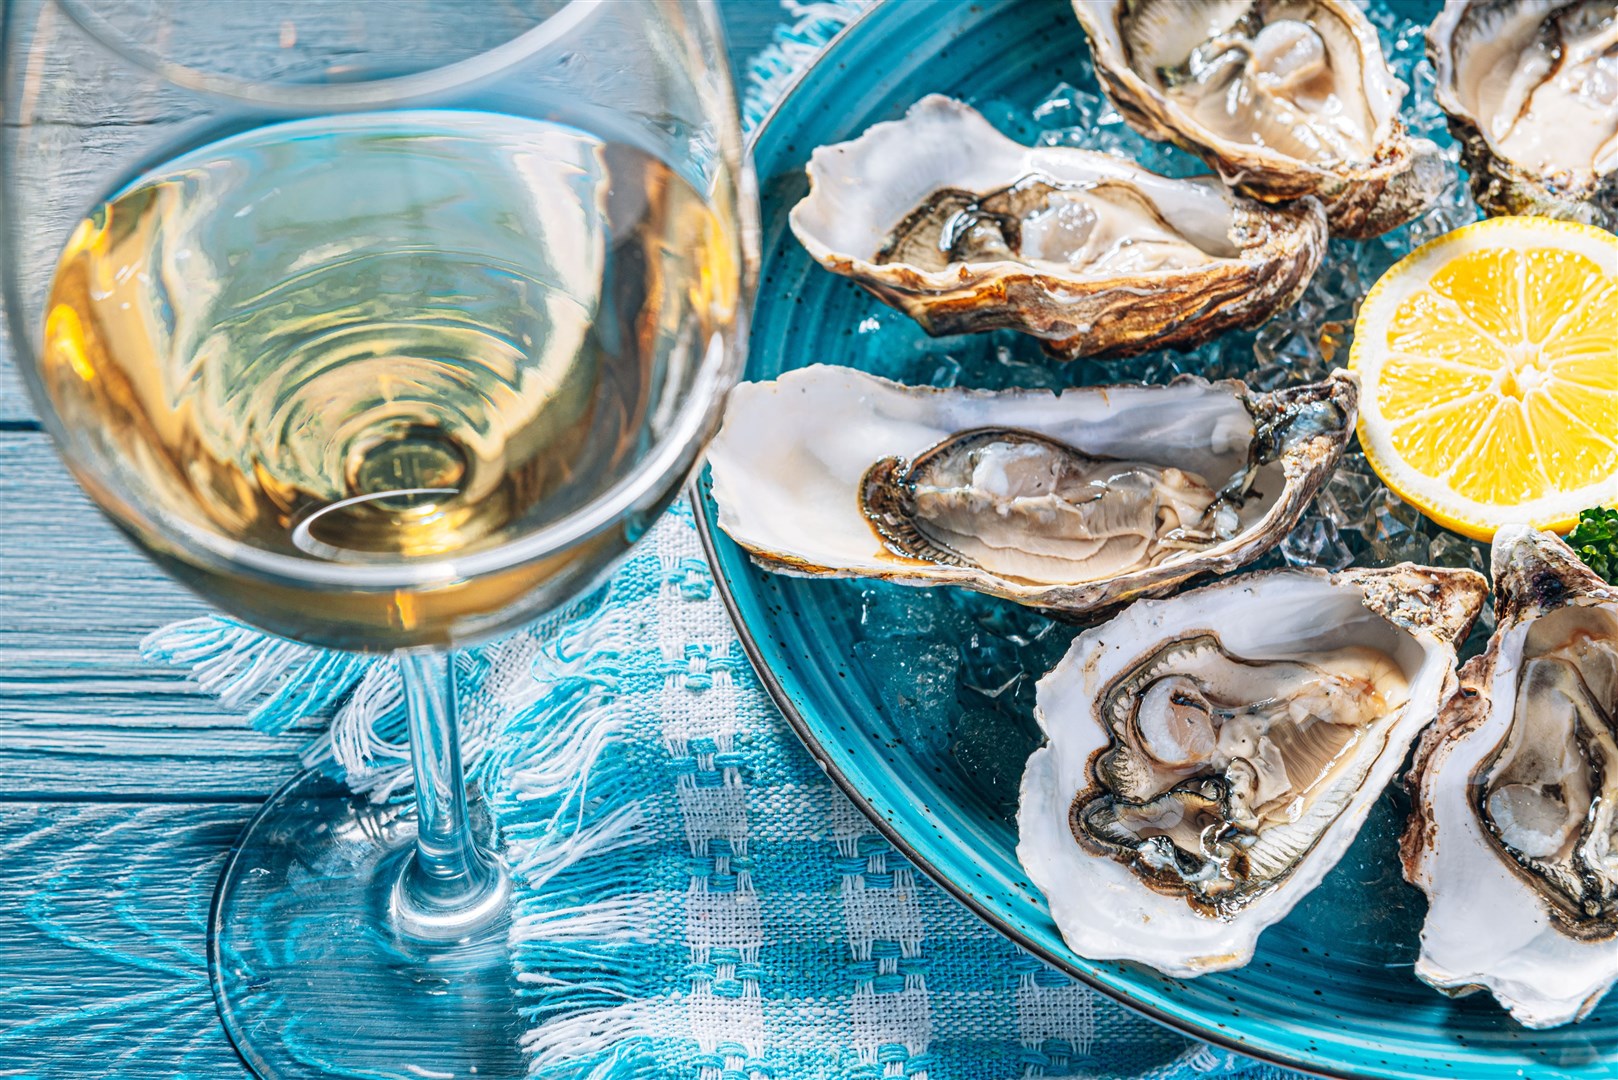 Fresh oysters with lemon ice and white wine. Picture: Stock.